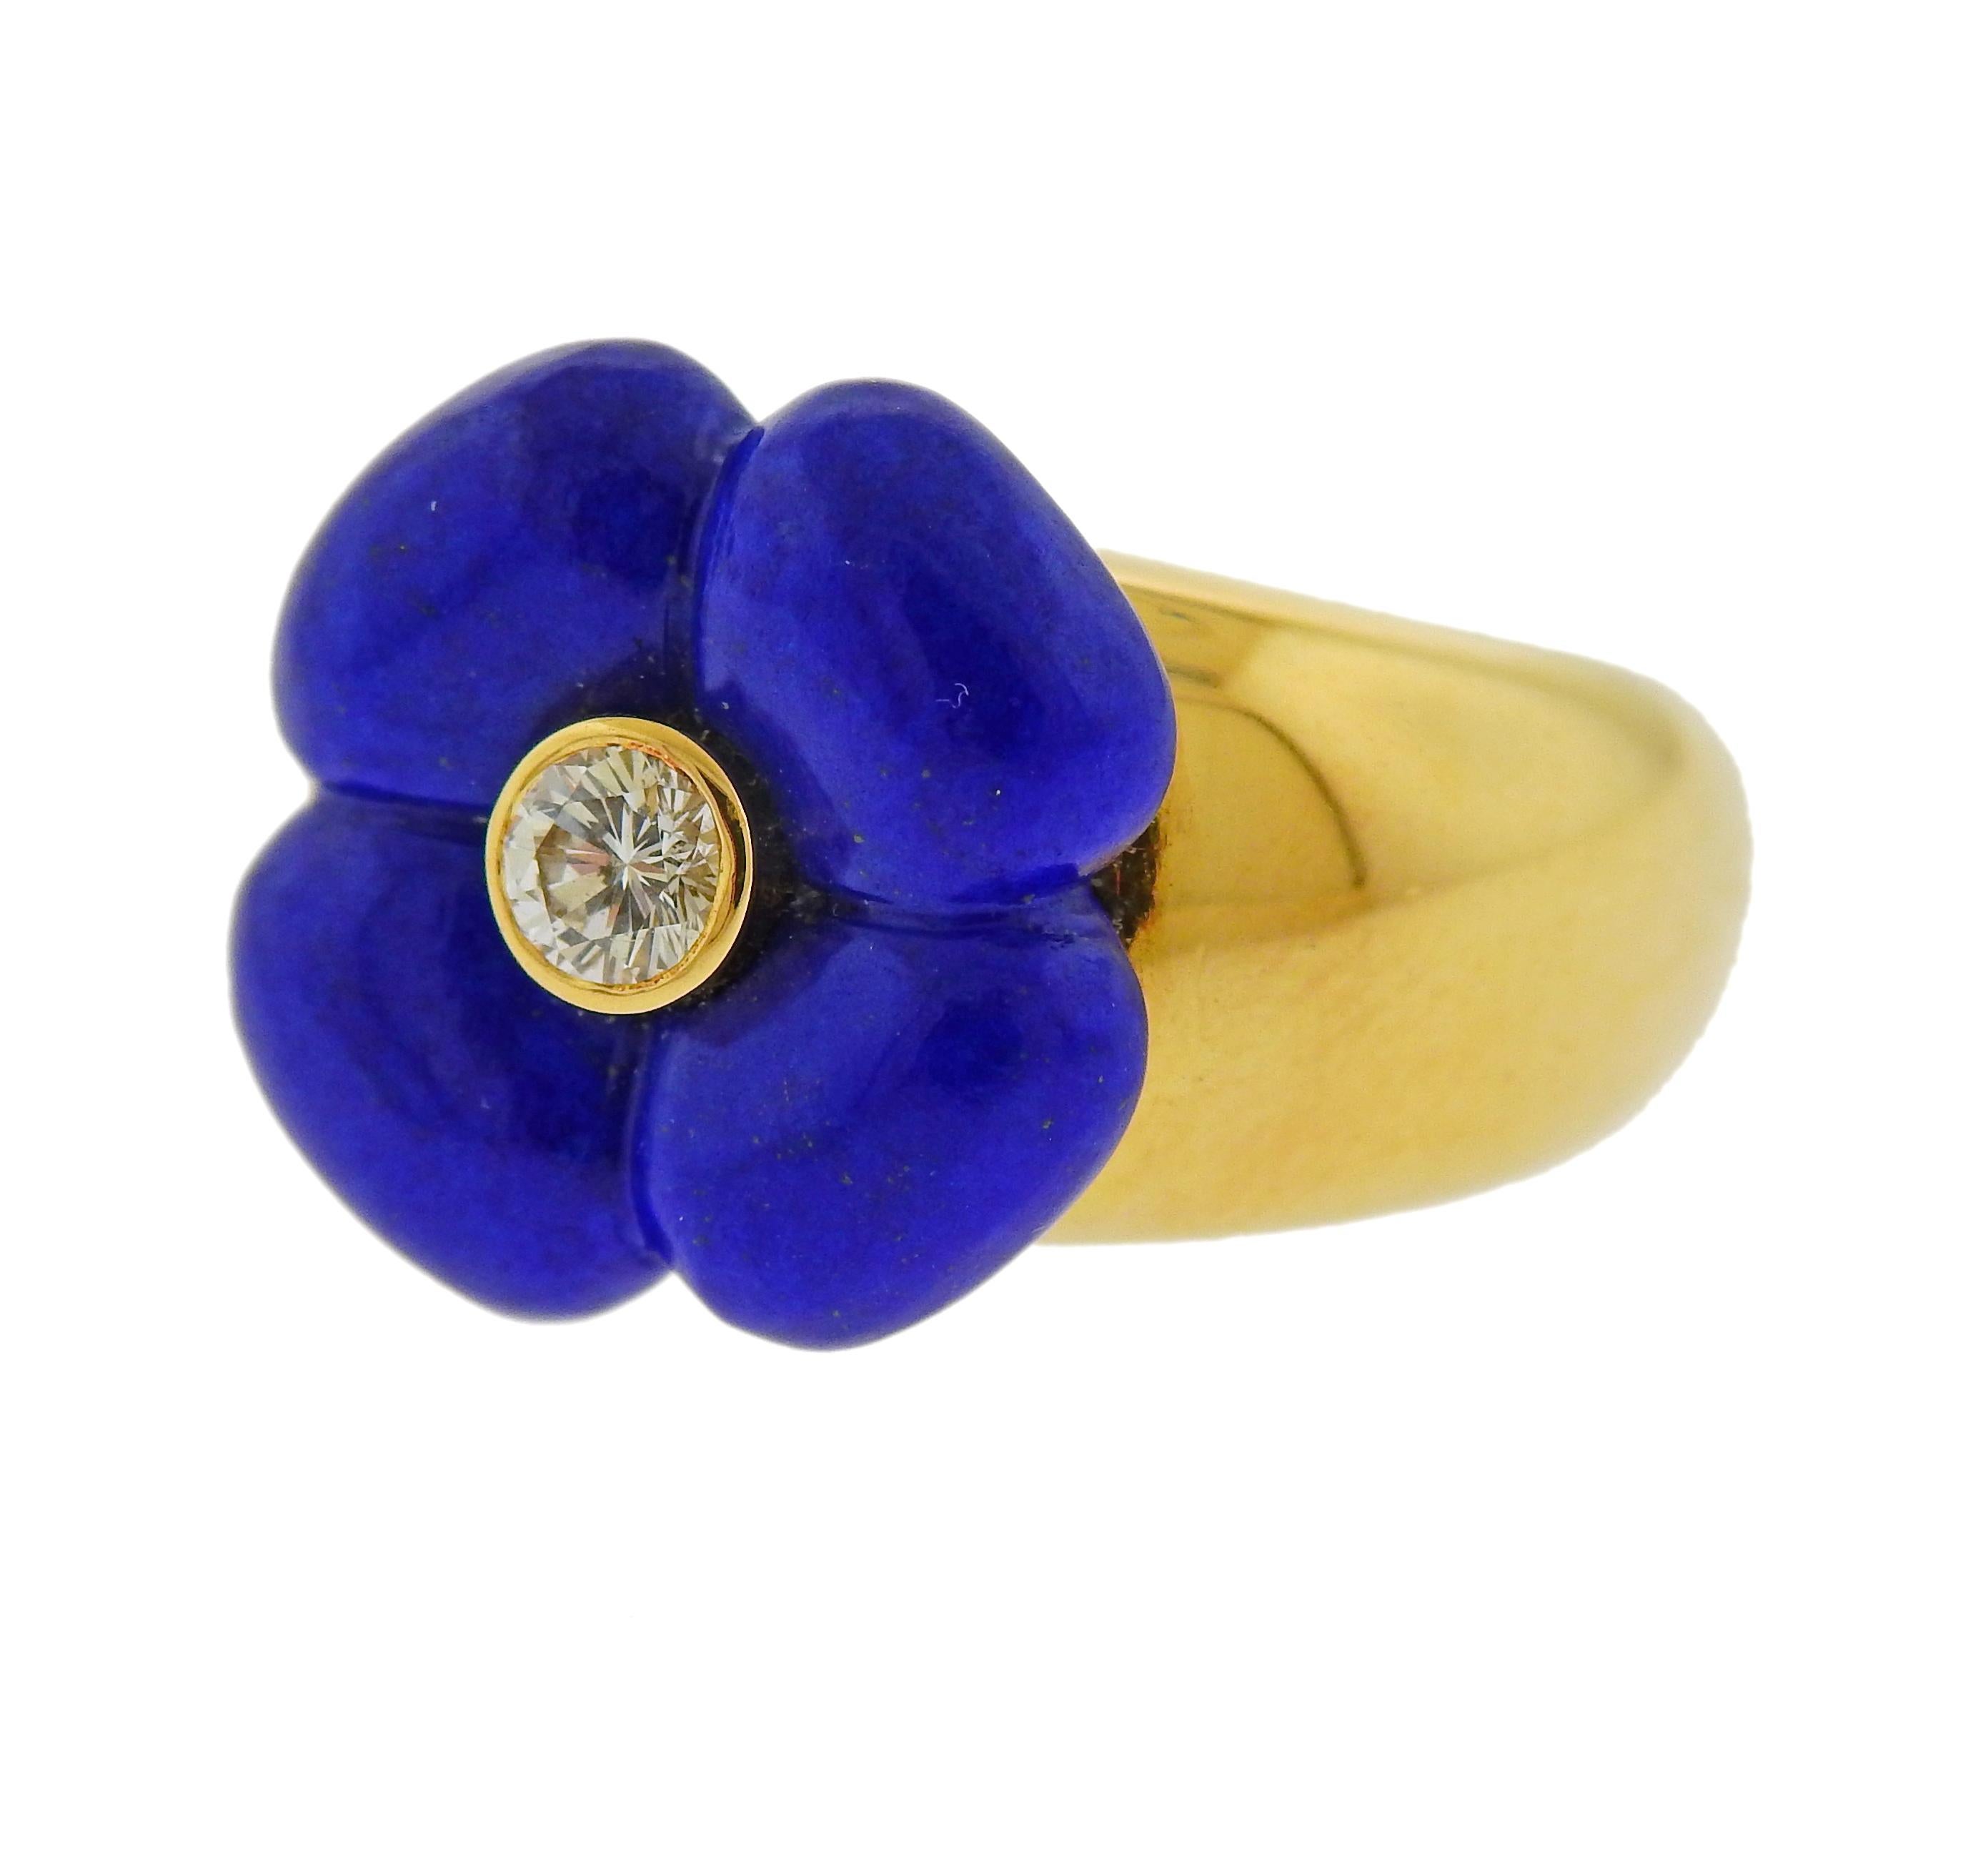 18k yellow gold flower ring by Van Cleef & Arpels, set with carved lapis lot and an approx. 0.20ct VVS/FG diamond in the center. Ring size - 6.25, ring top - 15mm x 15mm. Weight is 12.8 grams. Marked French marks, VCA, 18kt, 750, B5873 L1. 